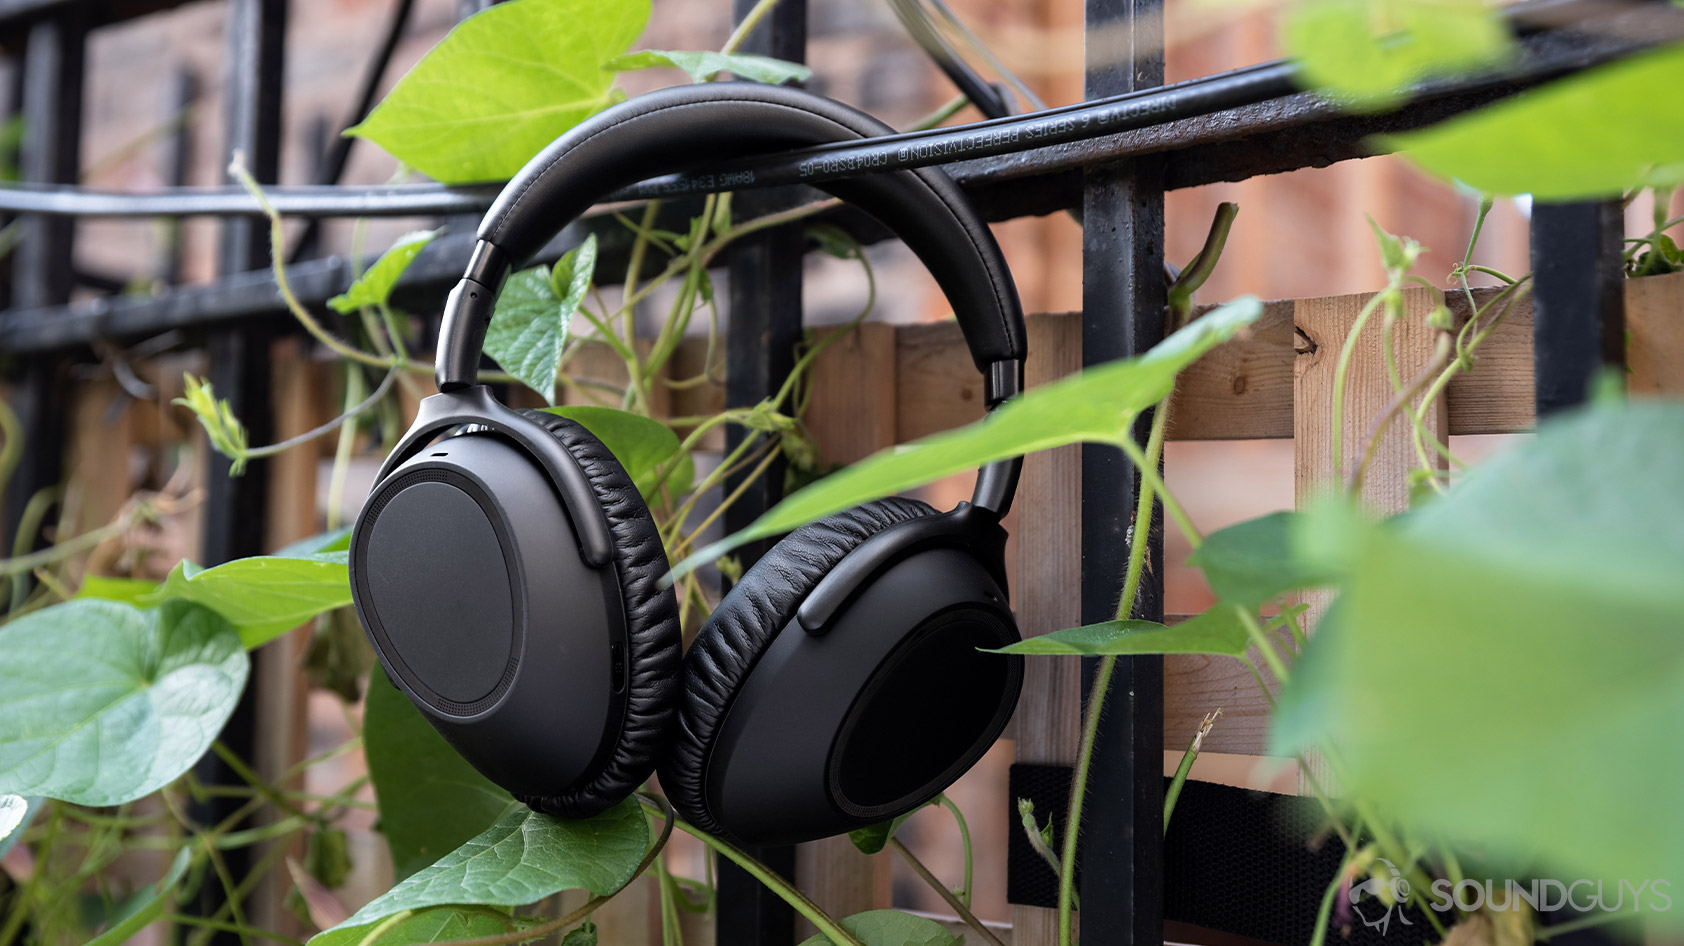 The Sennheiser PXC 550-II noise canceling headphones hanging in front of a fence and plants.